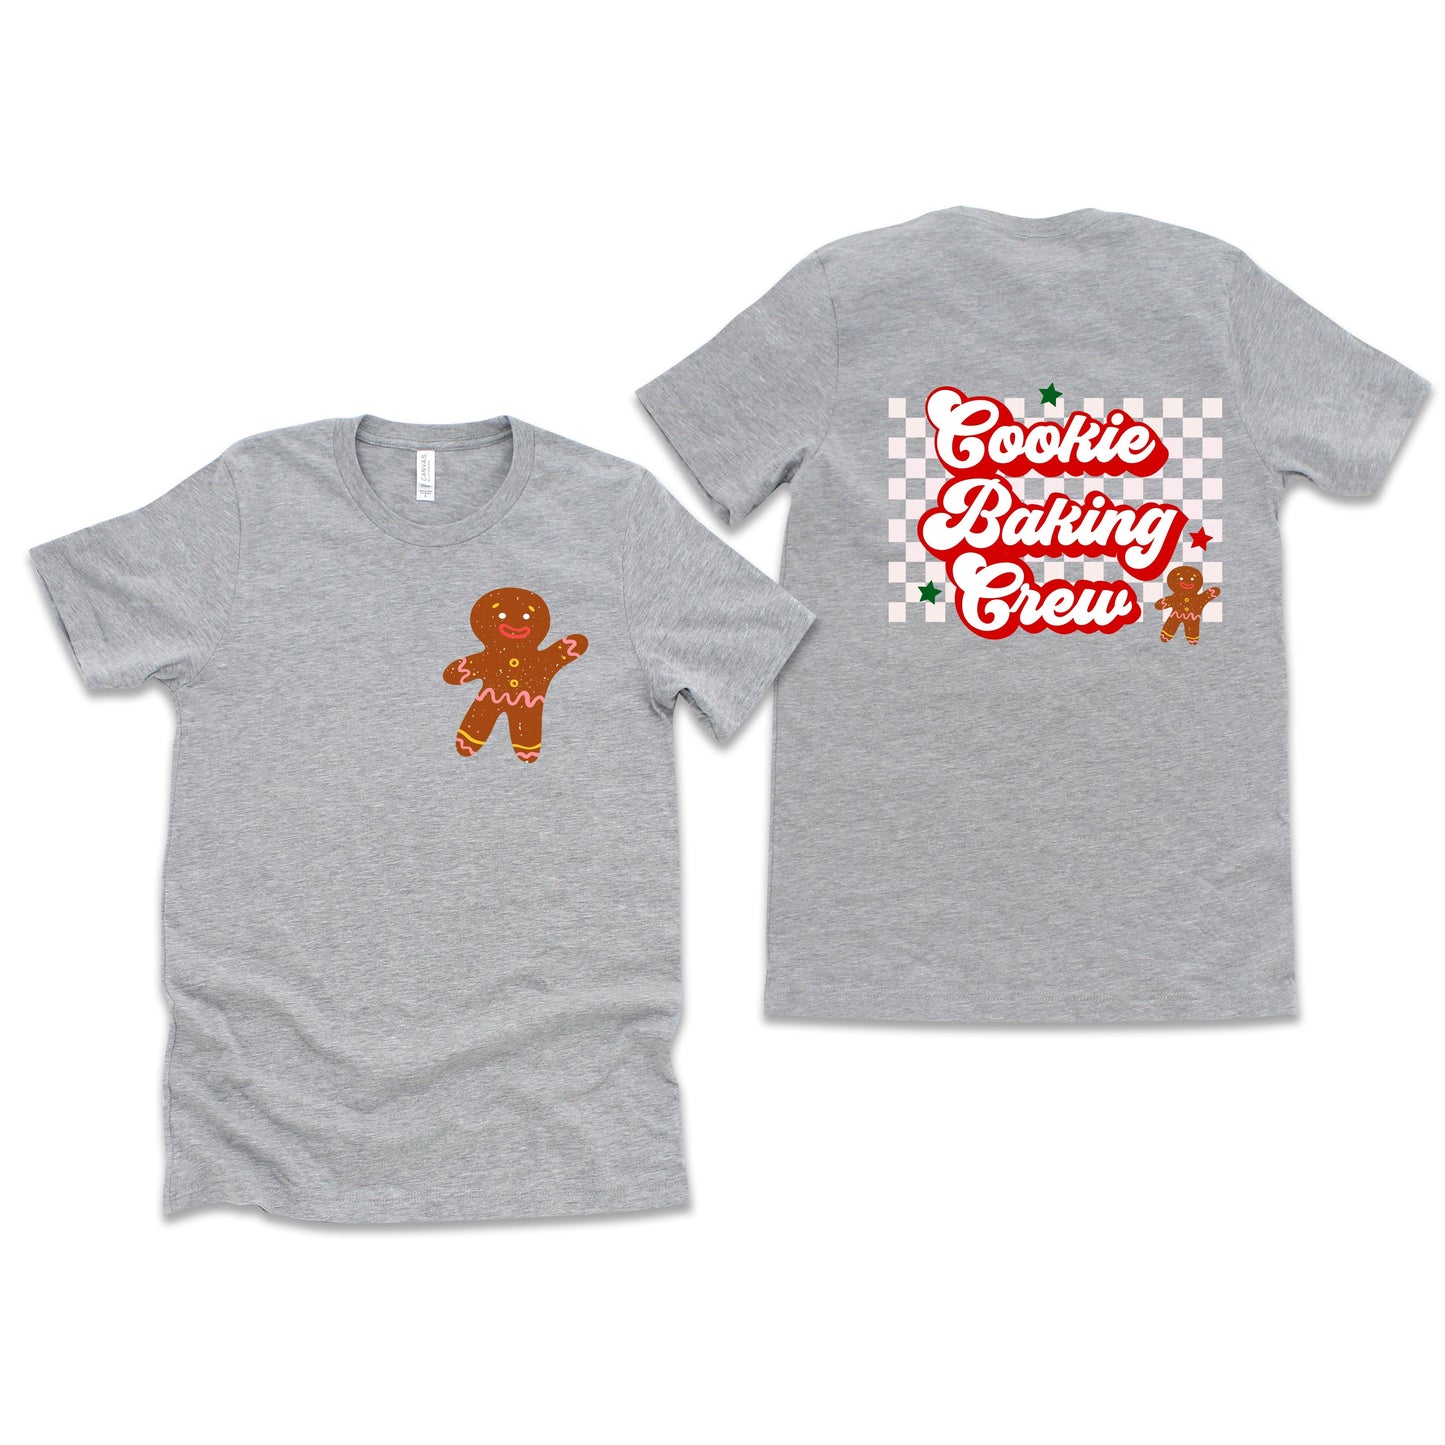 Cookie Baking Crew | Short Sleeve Crew Neck | Front and Back Ink